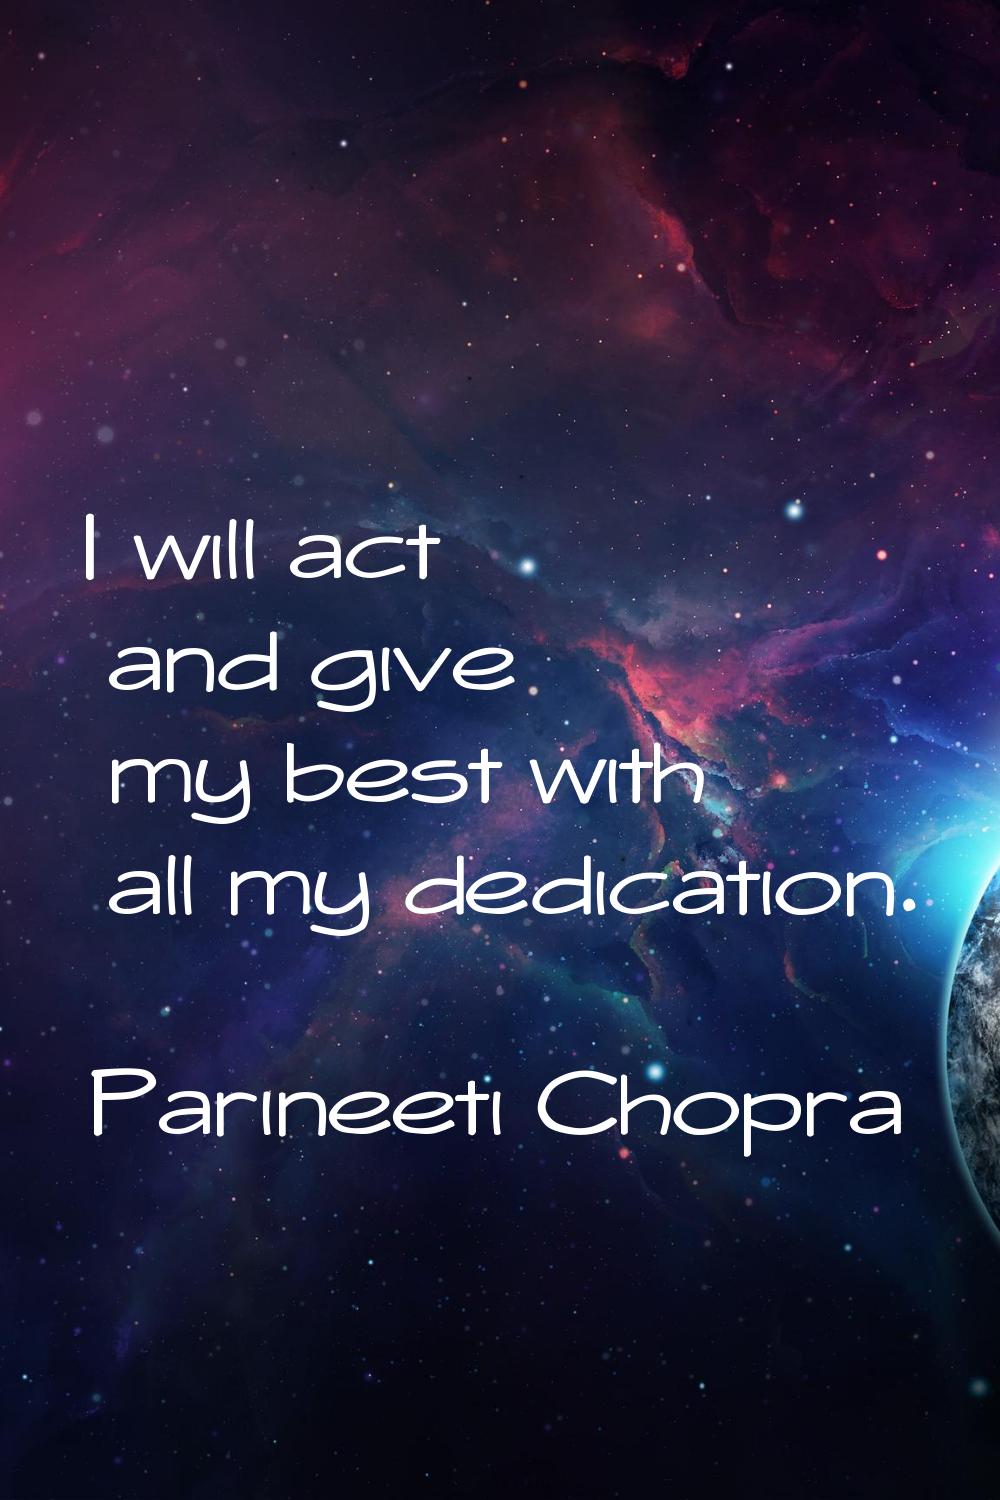 I will act and give my best with all my dedication.